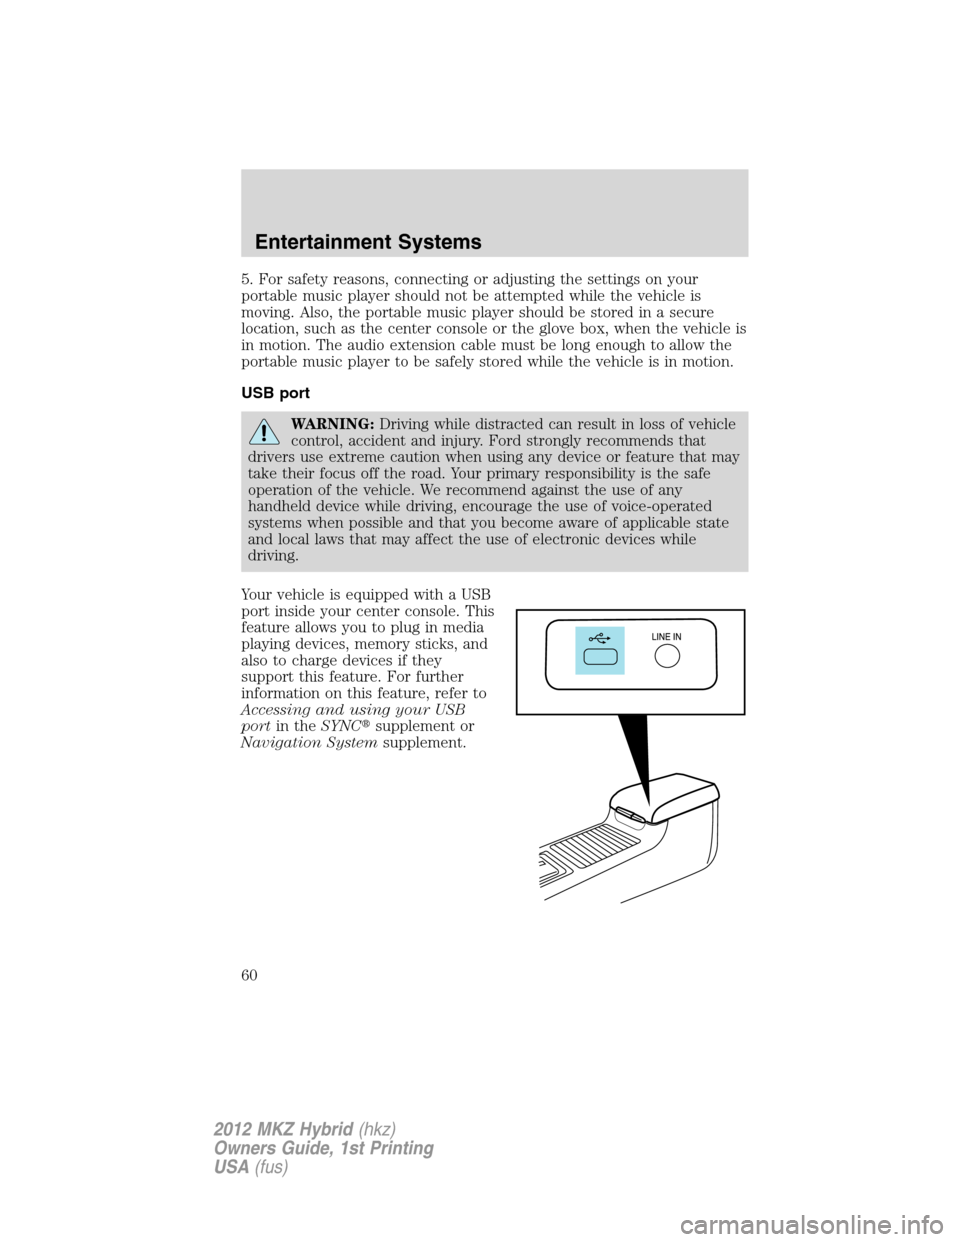 LINCOLN MKZ HYBRID 2012  Owners Manual 5. For safety reasons, connecting or adjusting the settings on your
portable music player should not be attempted while the vehicle is
moving. Also, the portable music player should be stored in a sec